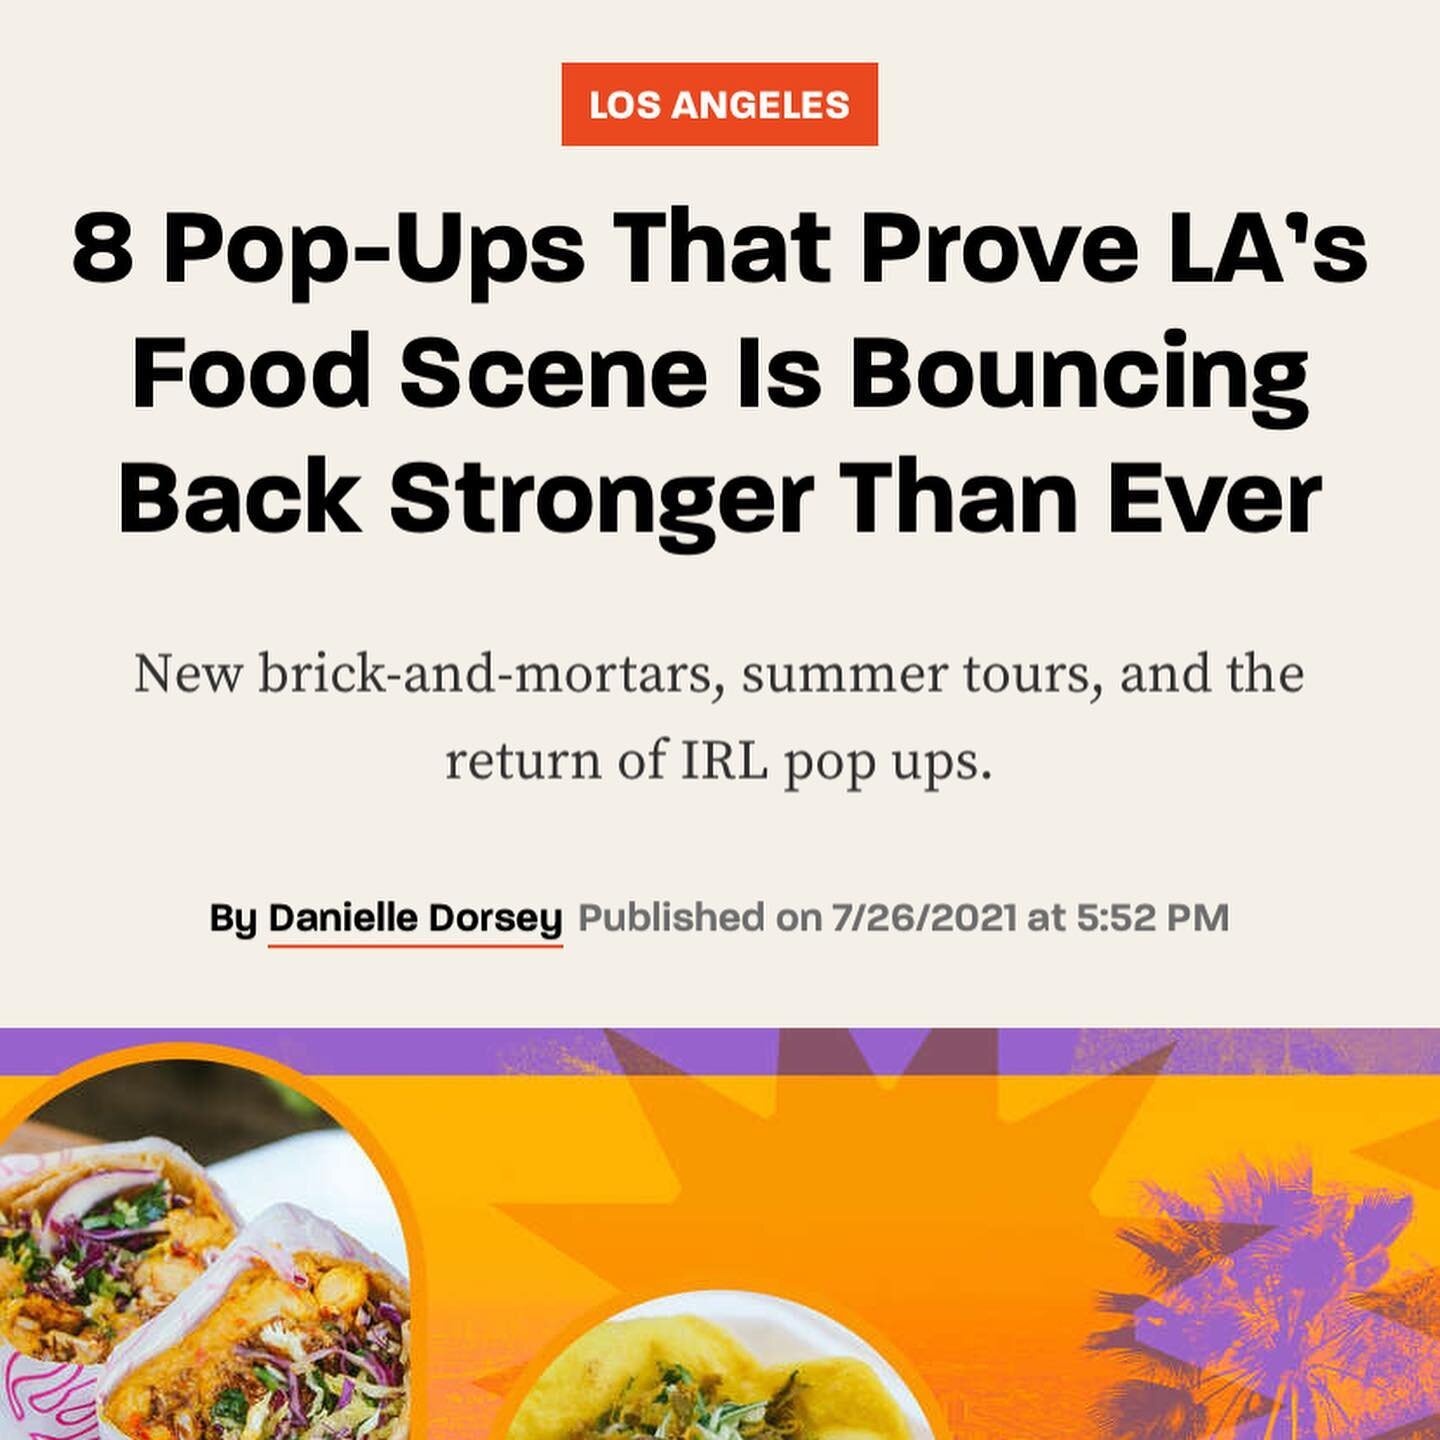 Felt good to wake up to this @thrillist write up on @thiccburgers today. (Link in my bio)

This journey has been wild and fun and scary and a constant push and test of what I&rsquo;m made of. I&rsquo;m just getting started and doing EVERYTHING I&rsqu